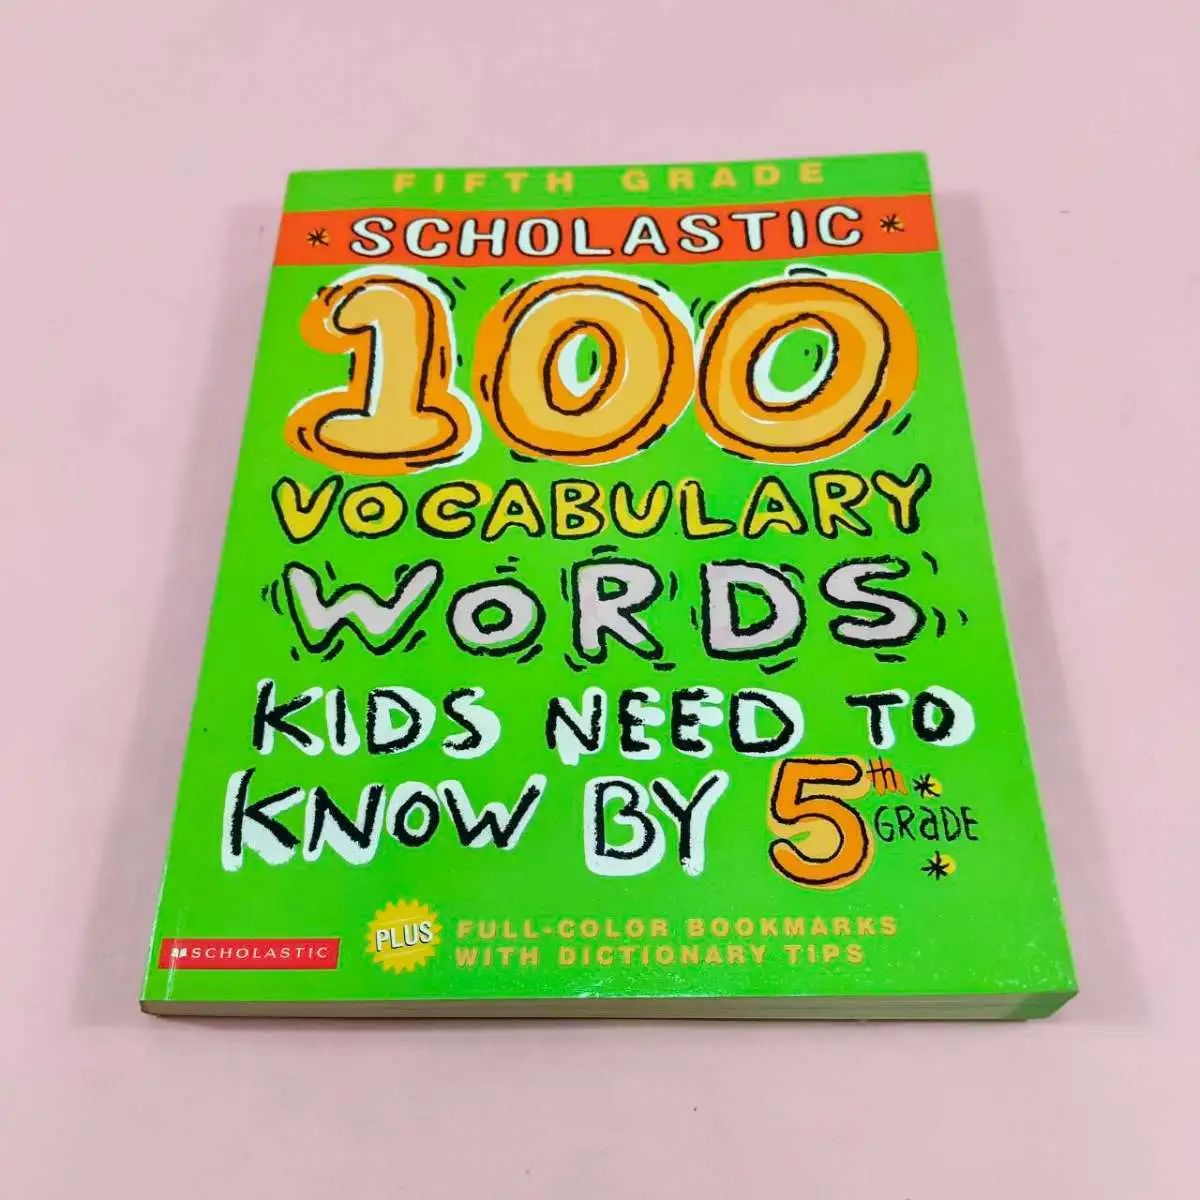 vocabulary words kids need to know by 5th geade เขียว 